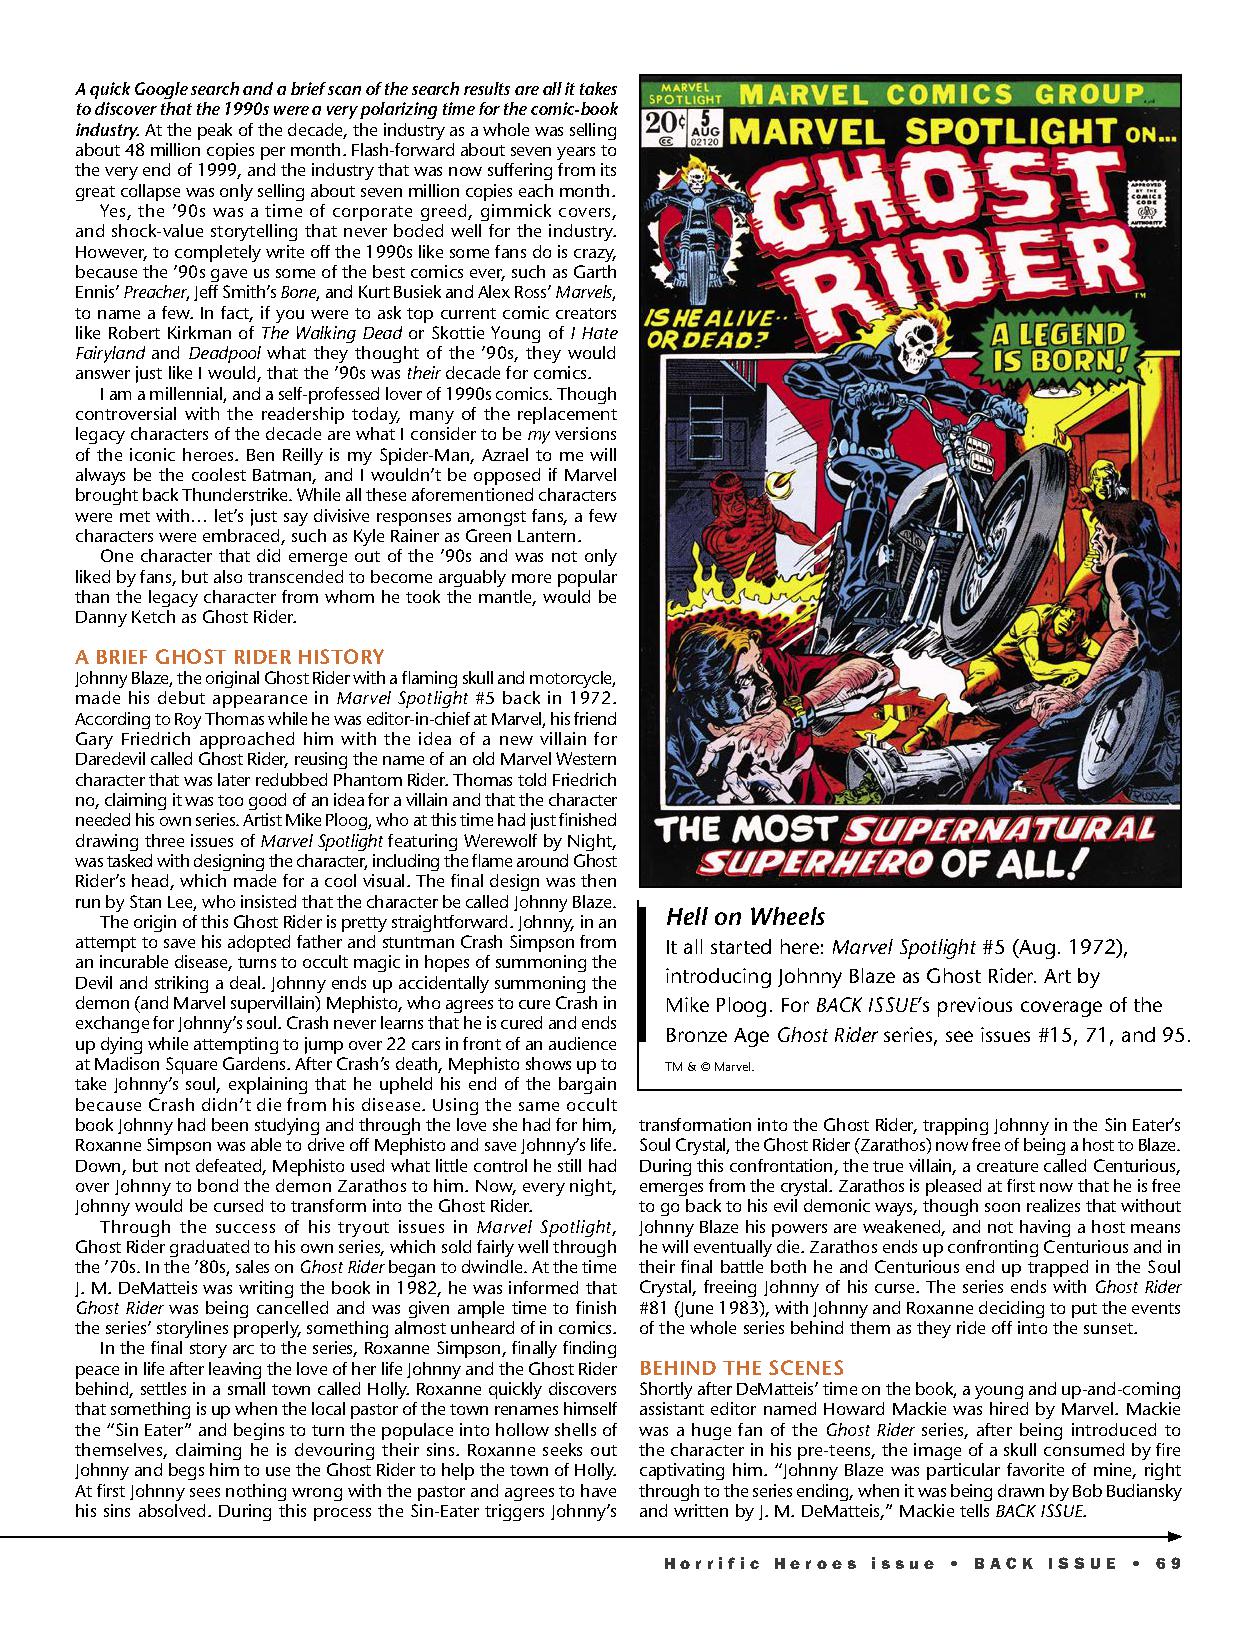 Read online Back Issue comic -  Issue #124 - 71